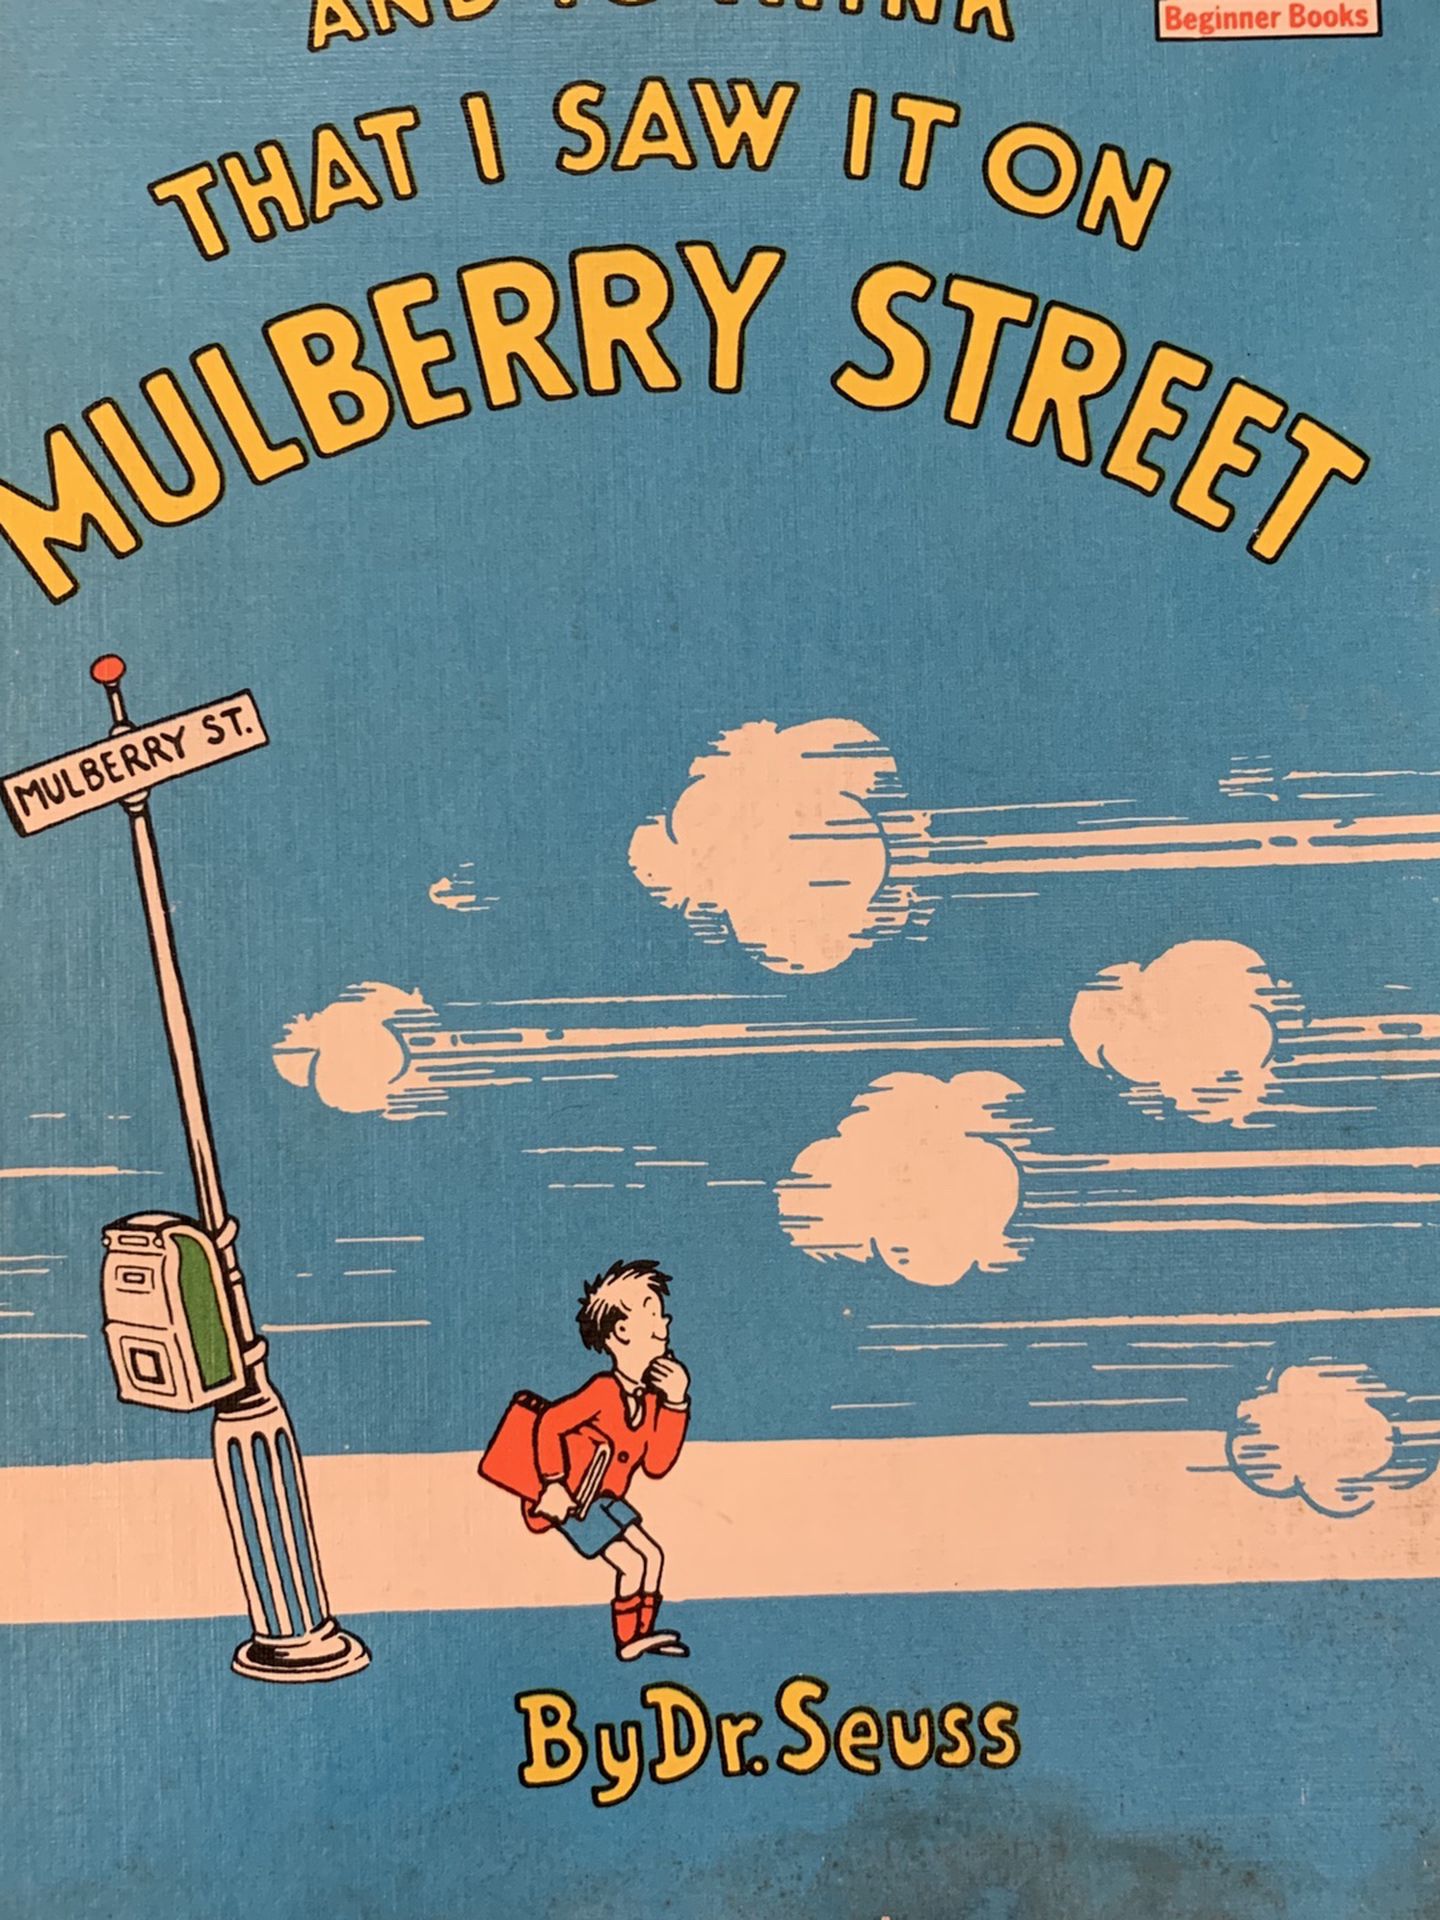 “And To Think That I Saw It On Mulberry Street By Dr. Seuss